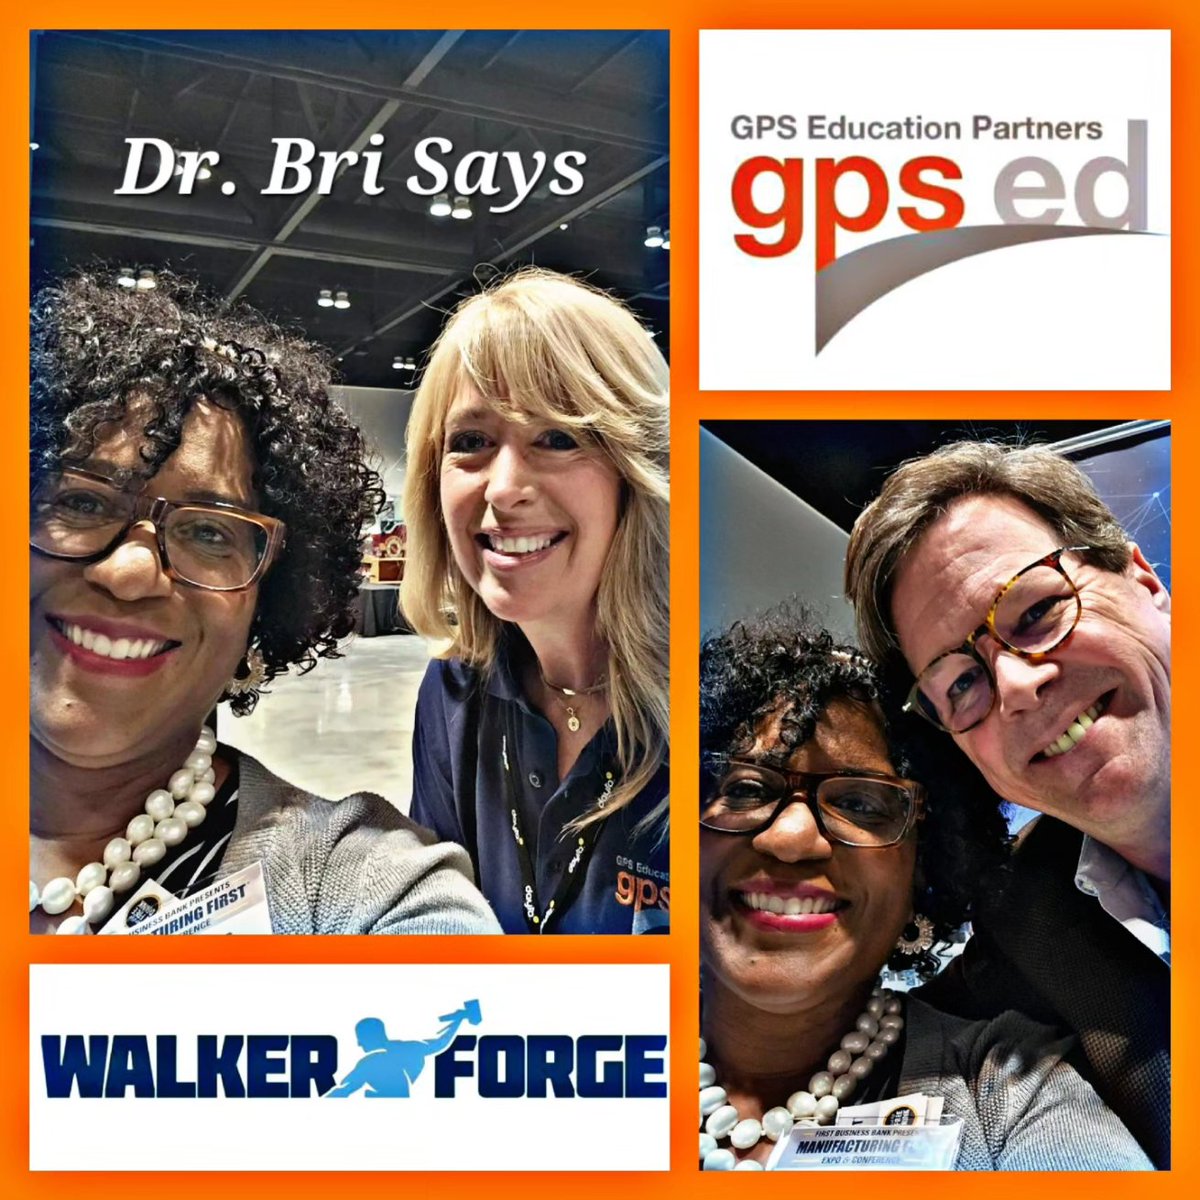 #2023 Manufacturing Expo 
@GPSEdPartners & @Walkerforge 
❤️❤️❤️❤️❤️❤️❤️❤️❤️❤️❤️❤️❤️